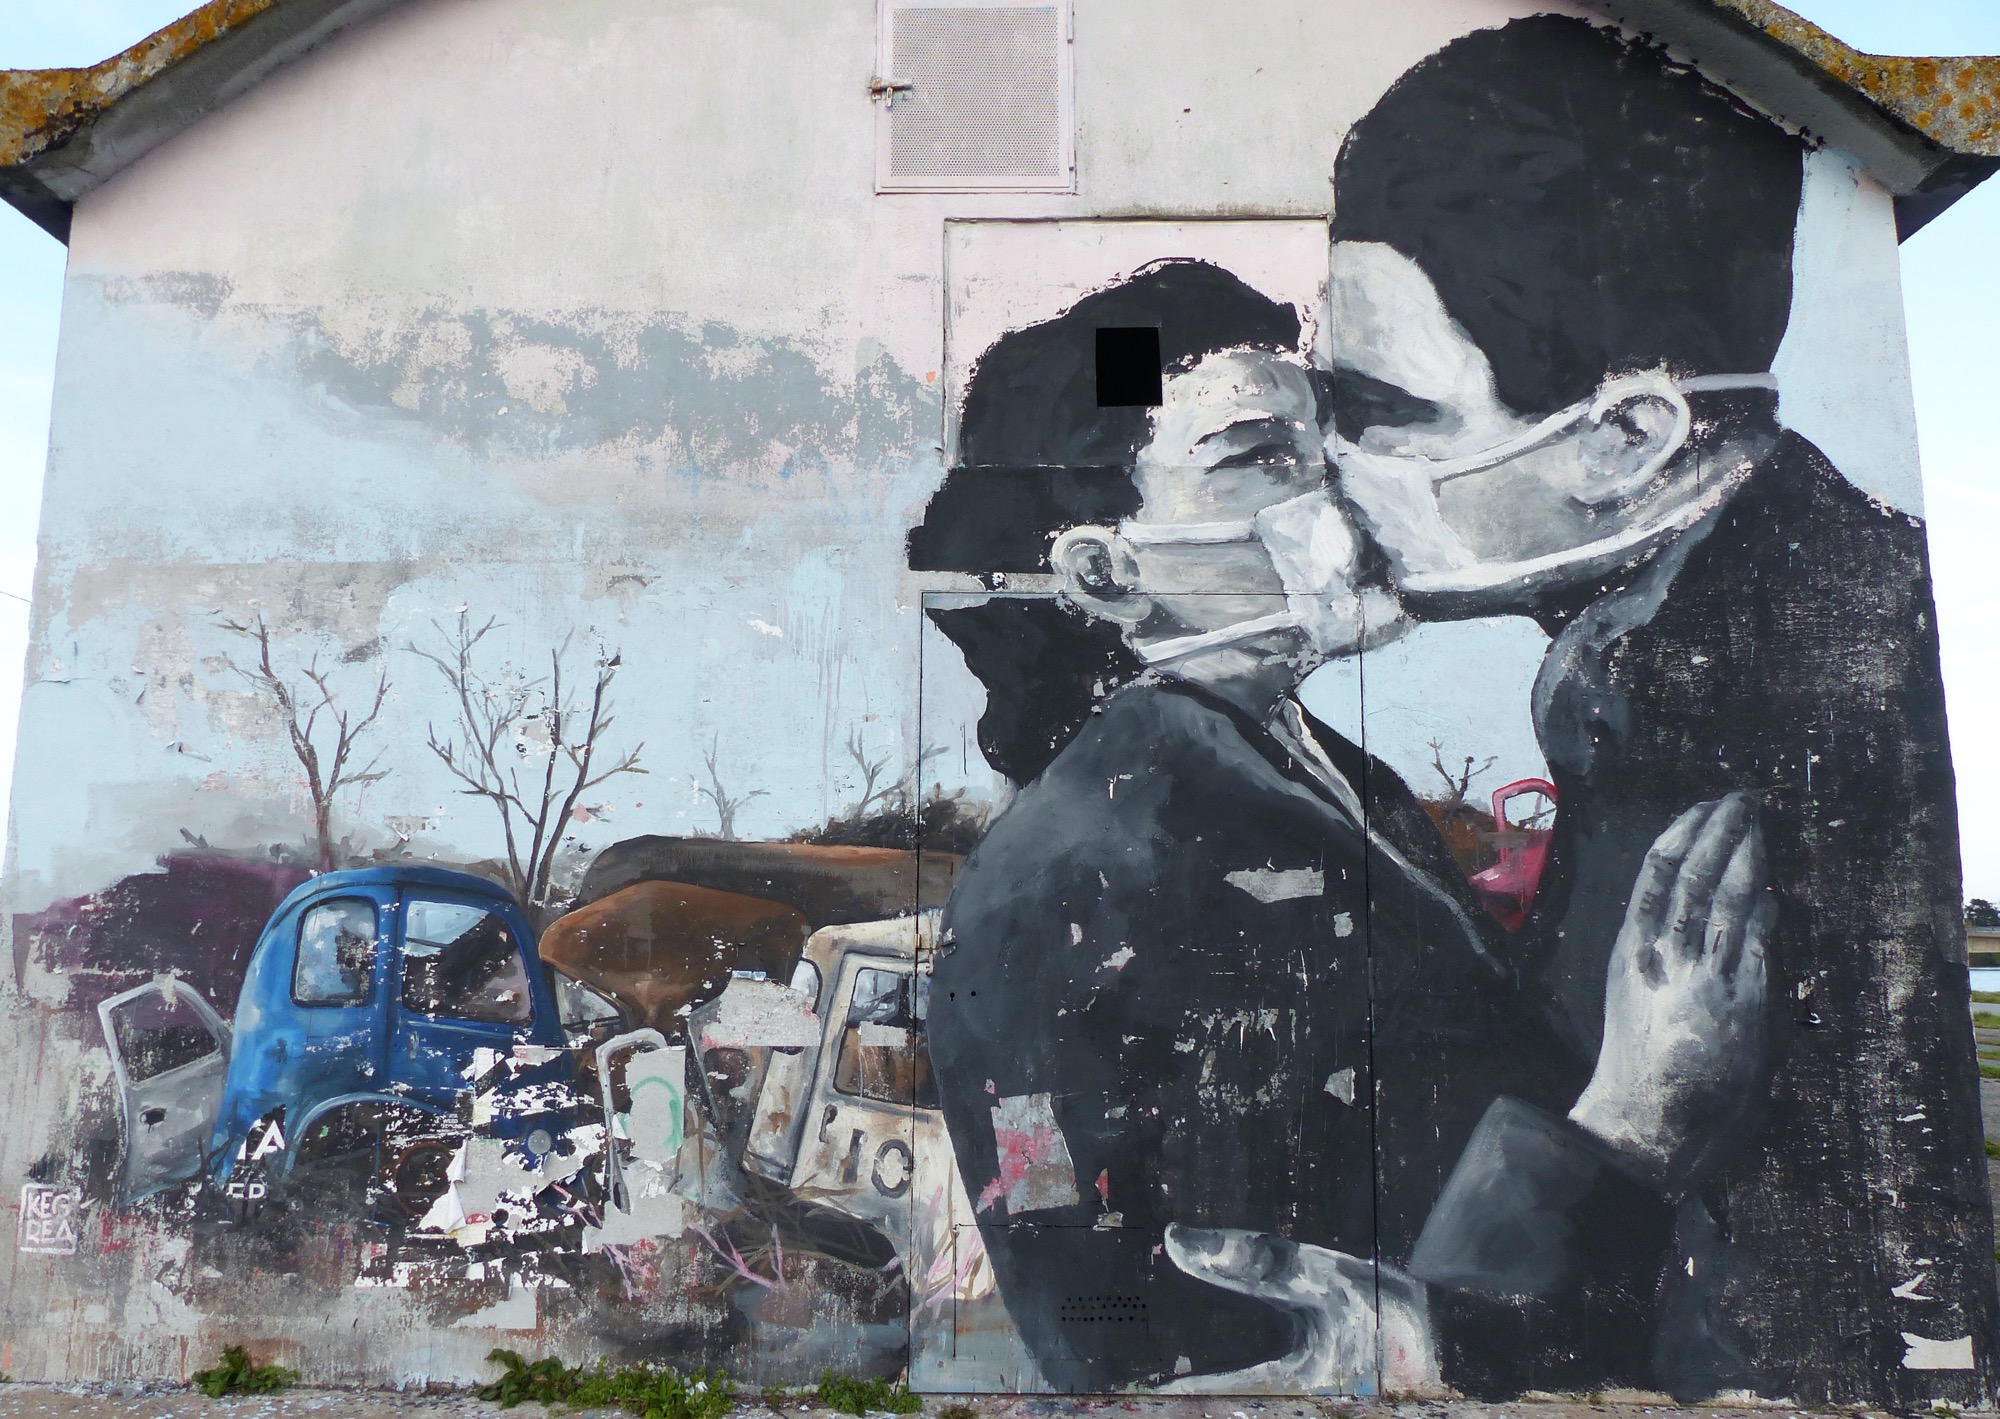 Graffiti 29  by the artist Kegrea captured by Rabot in Nantes France